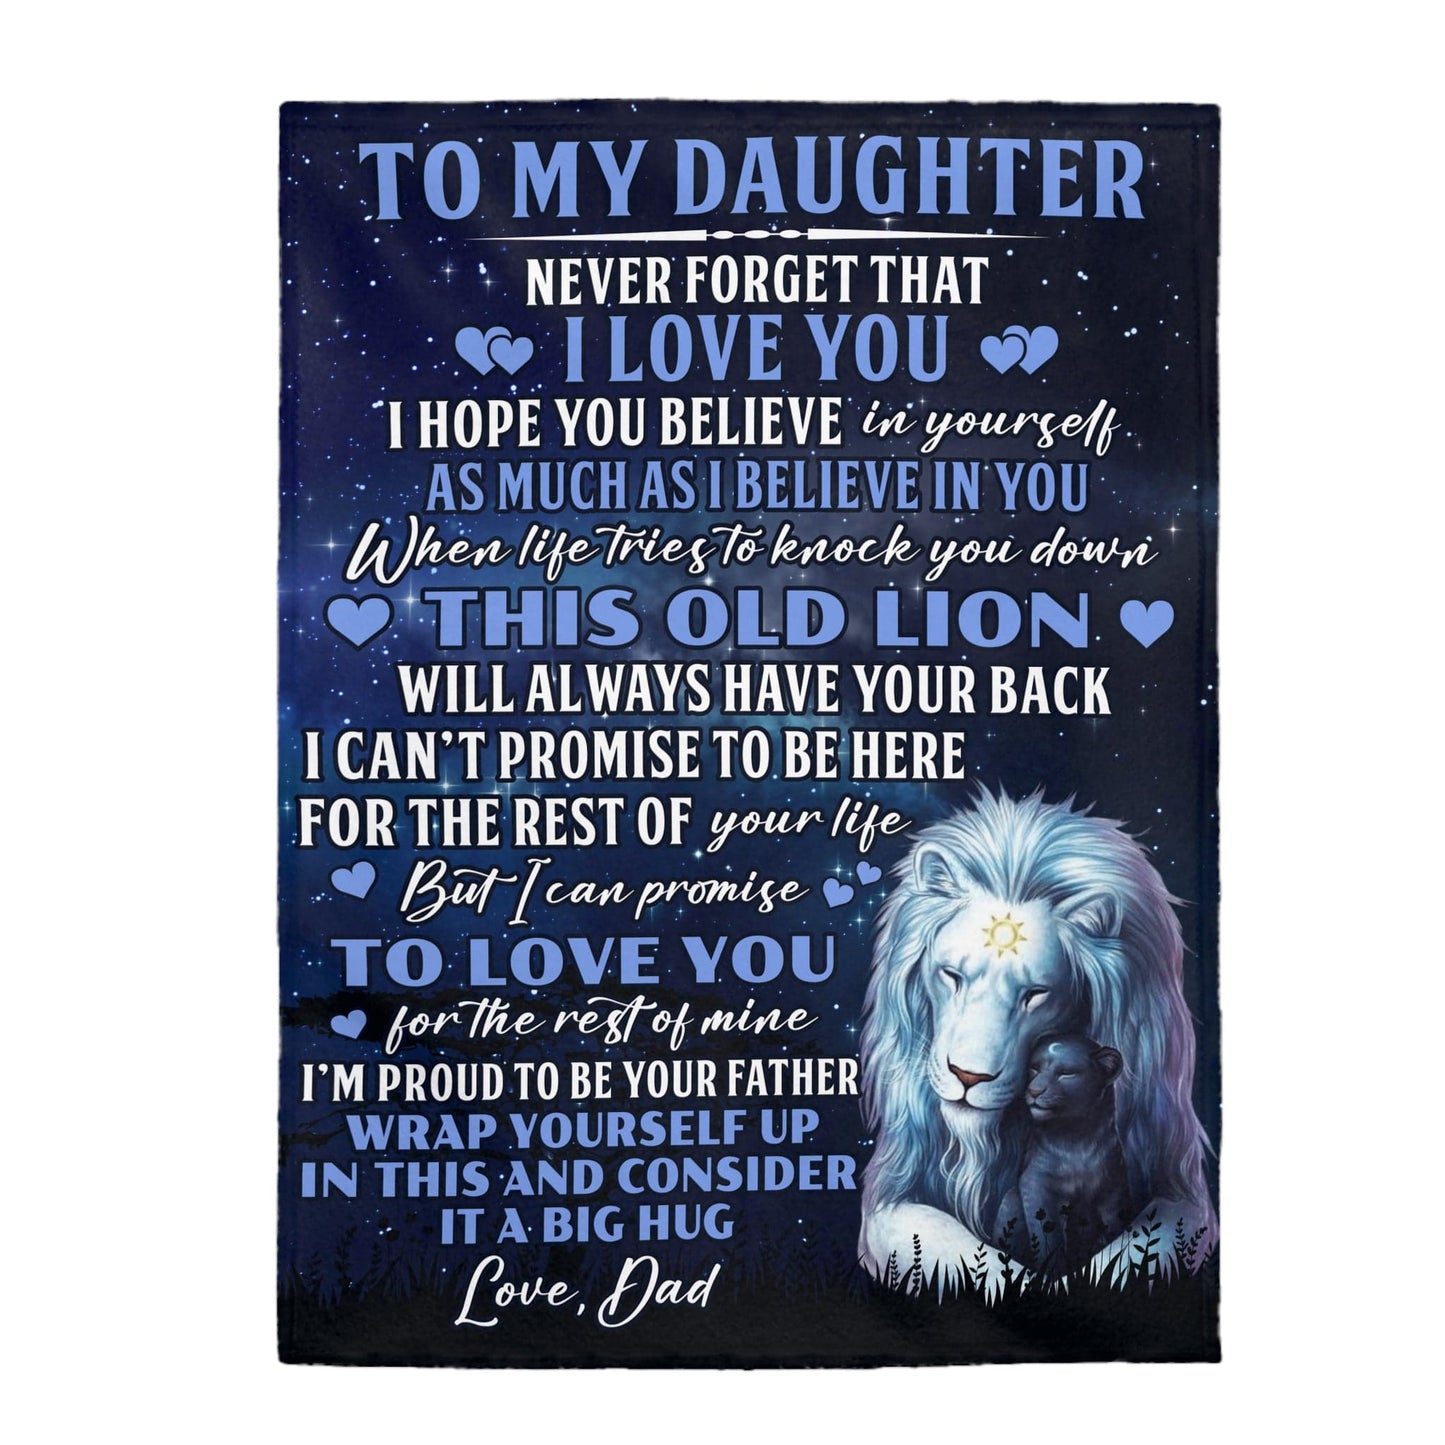 To My Daughter Love Dad - This Old Lion - Cozy Plush Fleece Blanket Gift for Daughter 60"x80"